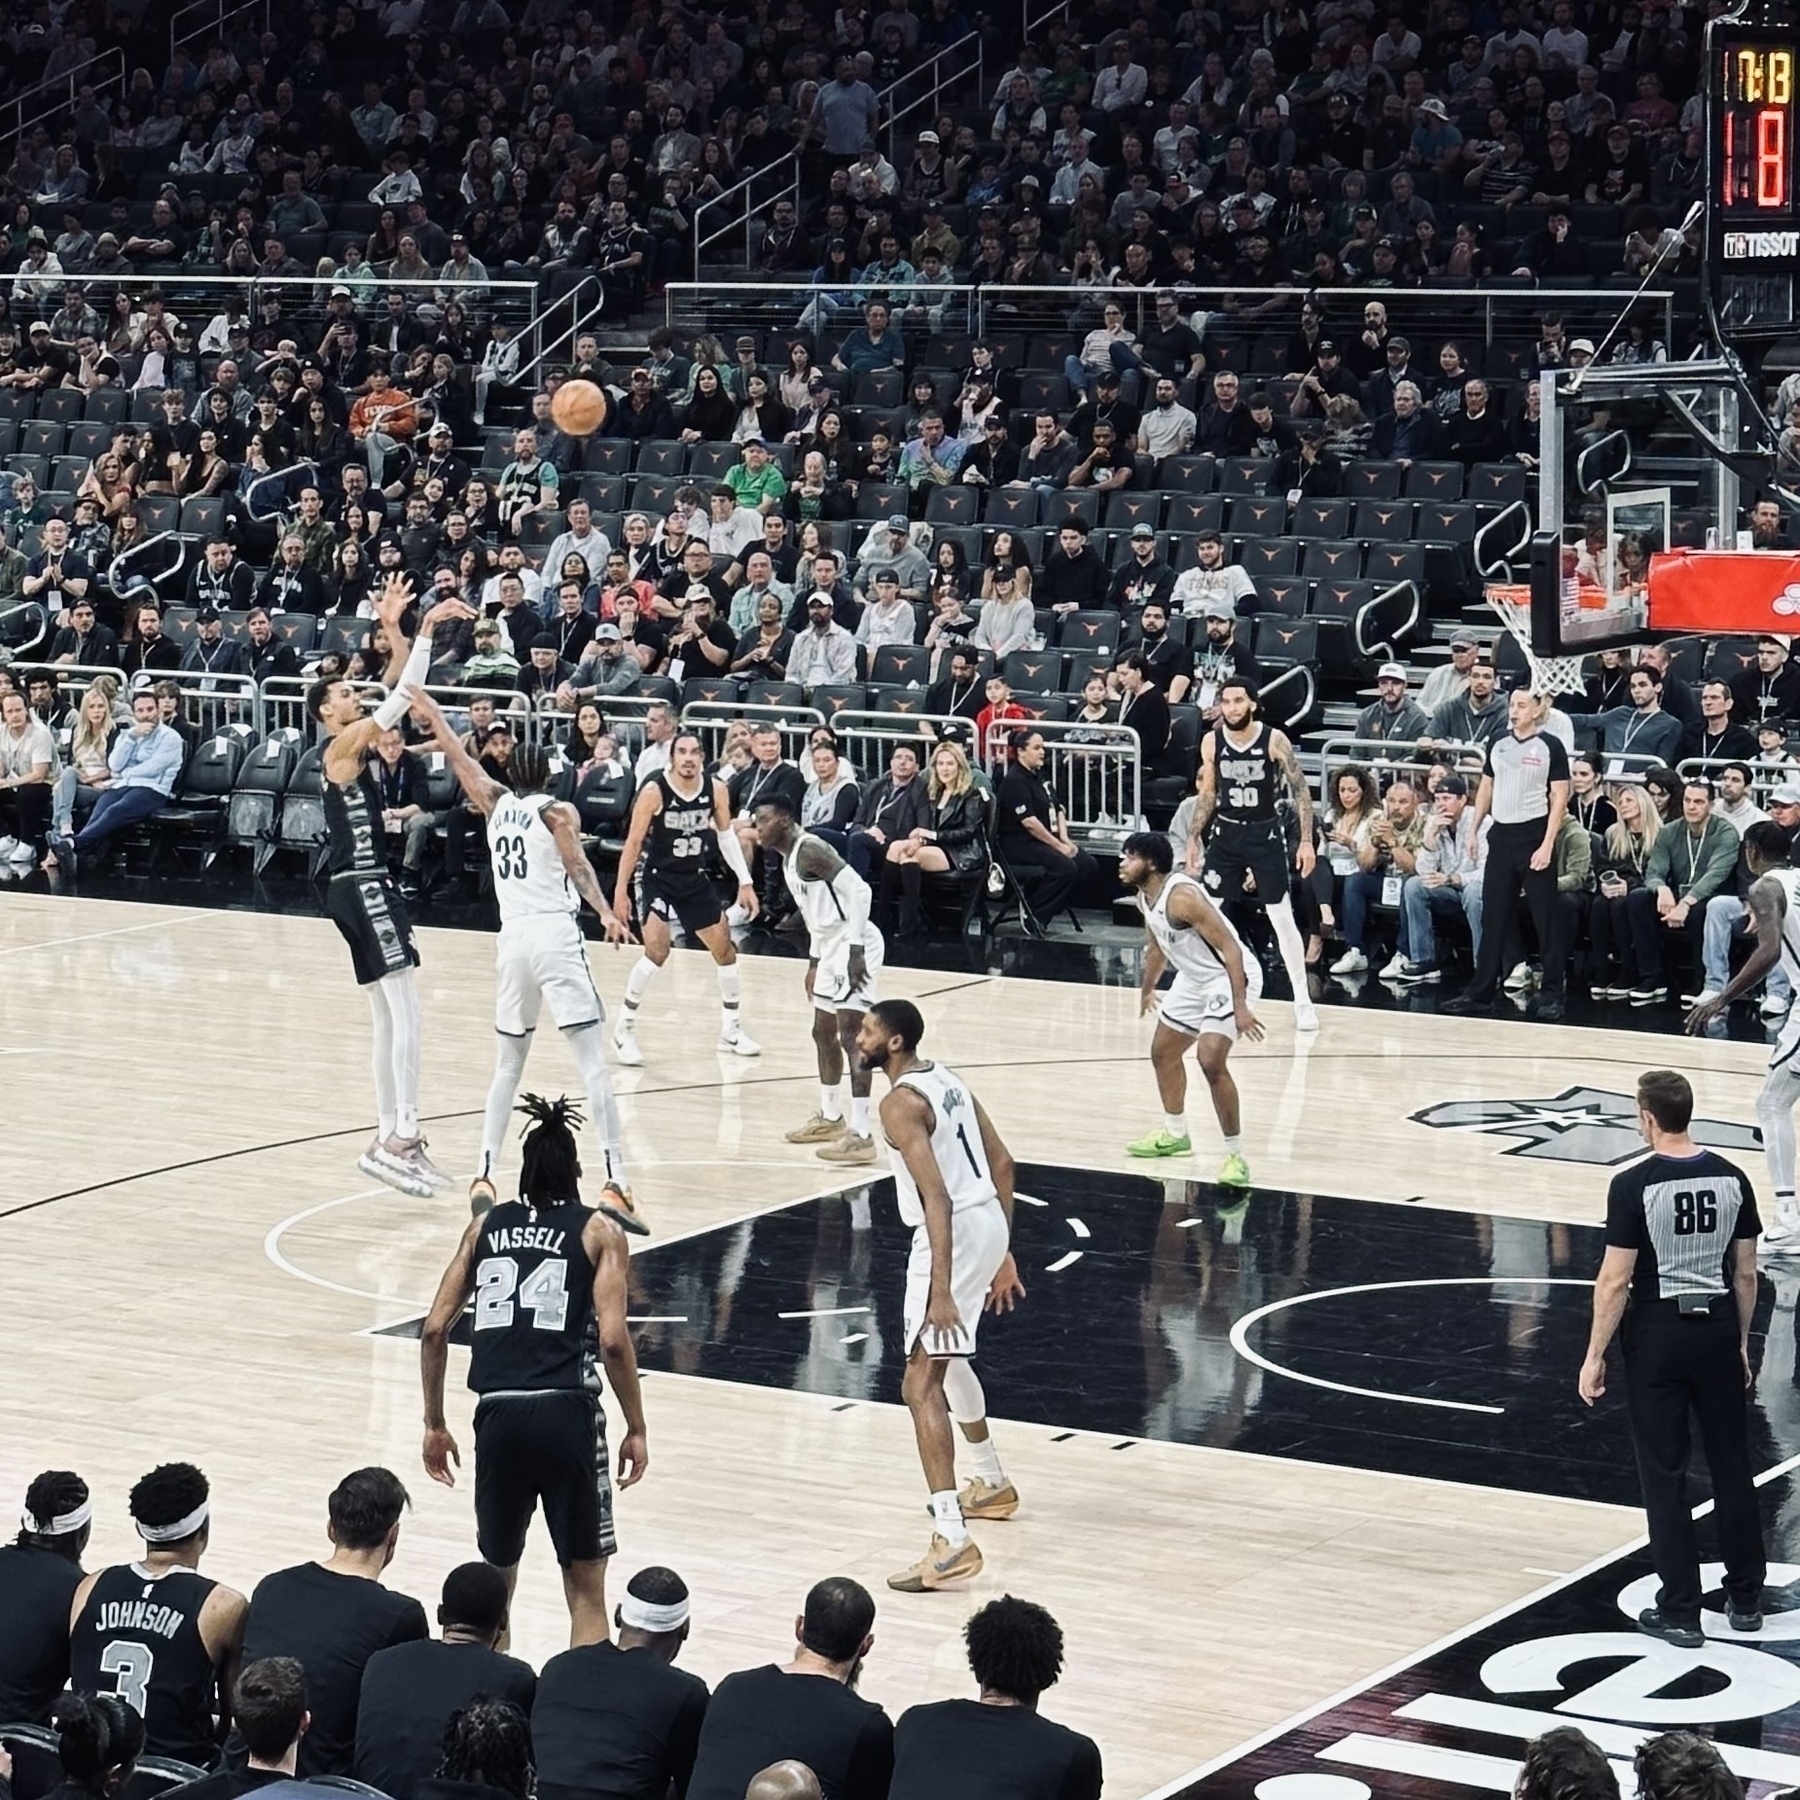 Victor shooting over the Brooklyn Nets.